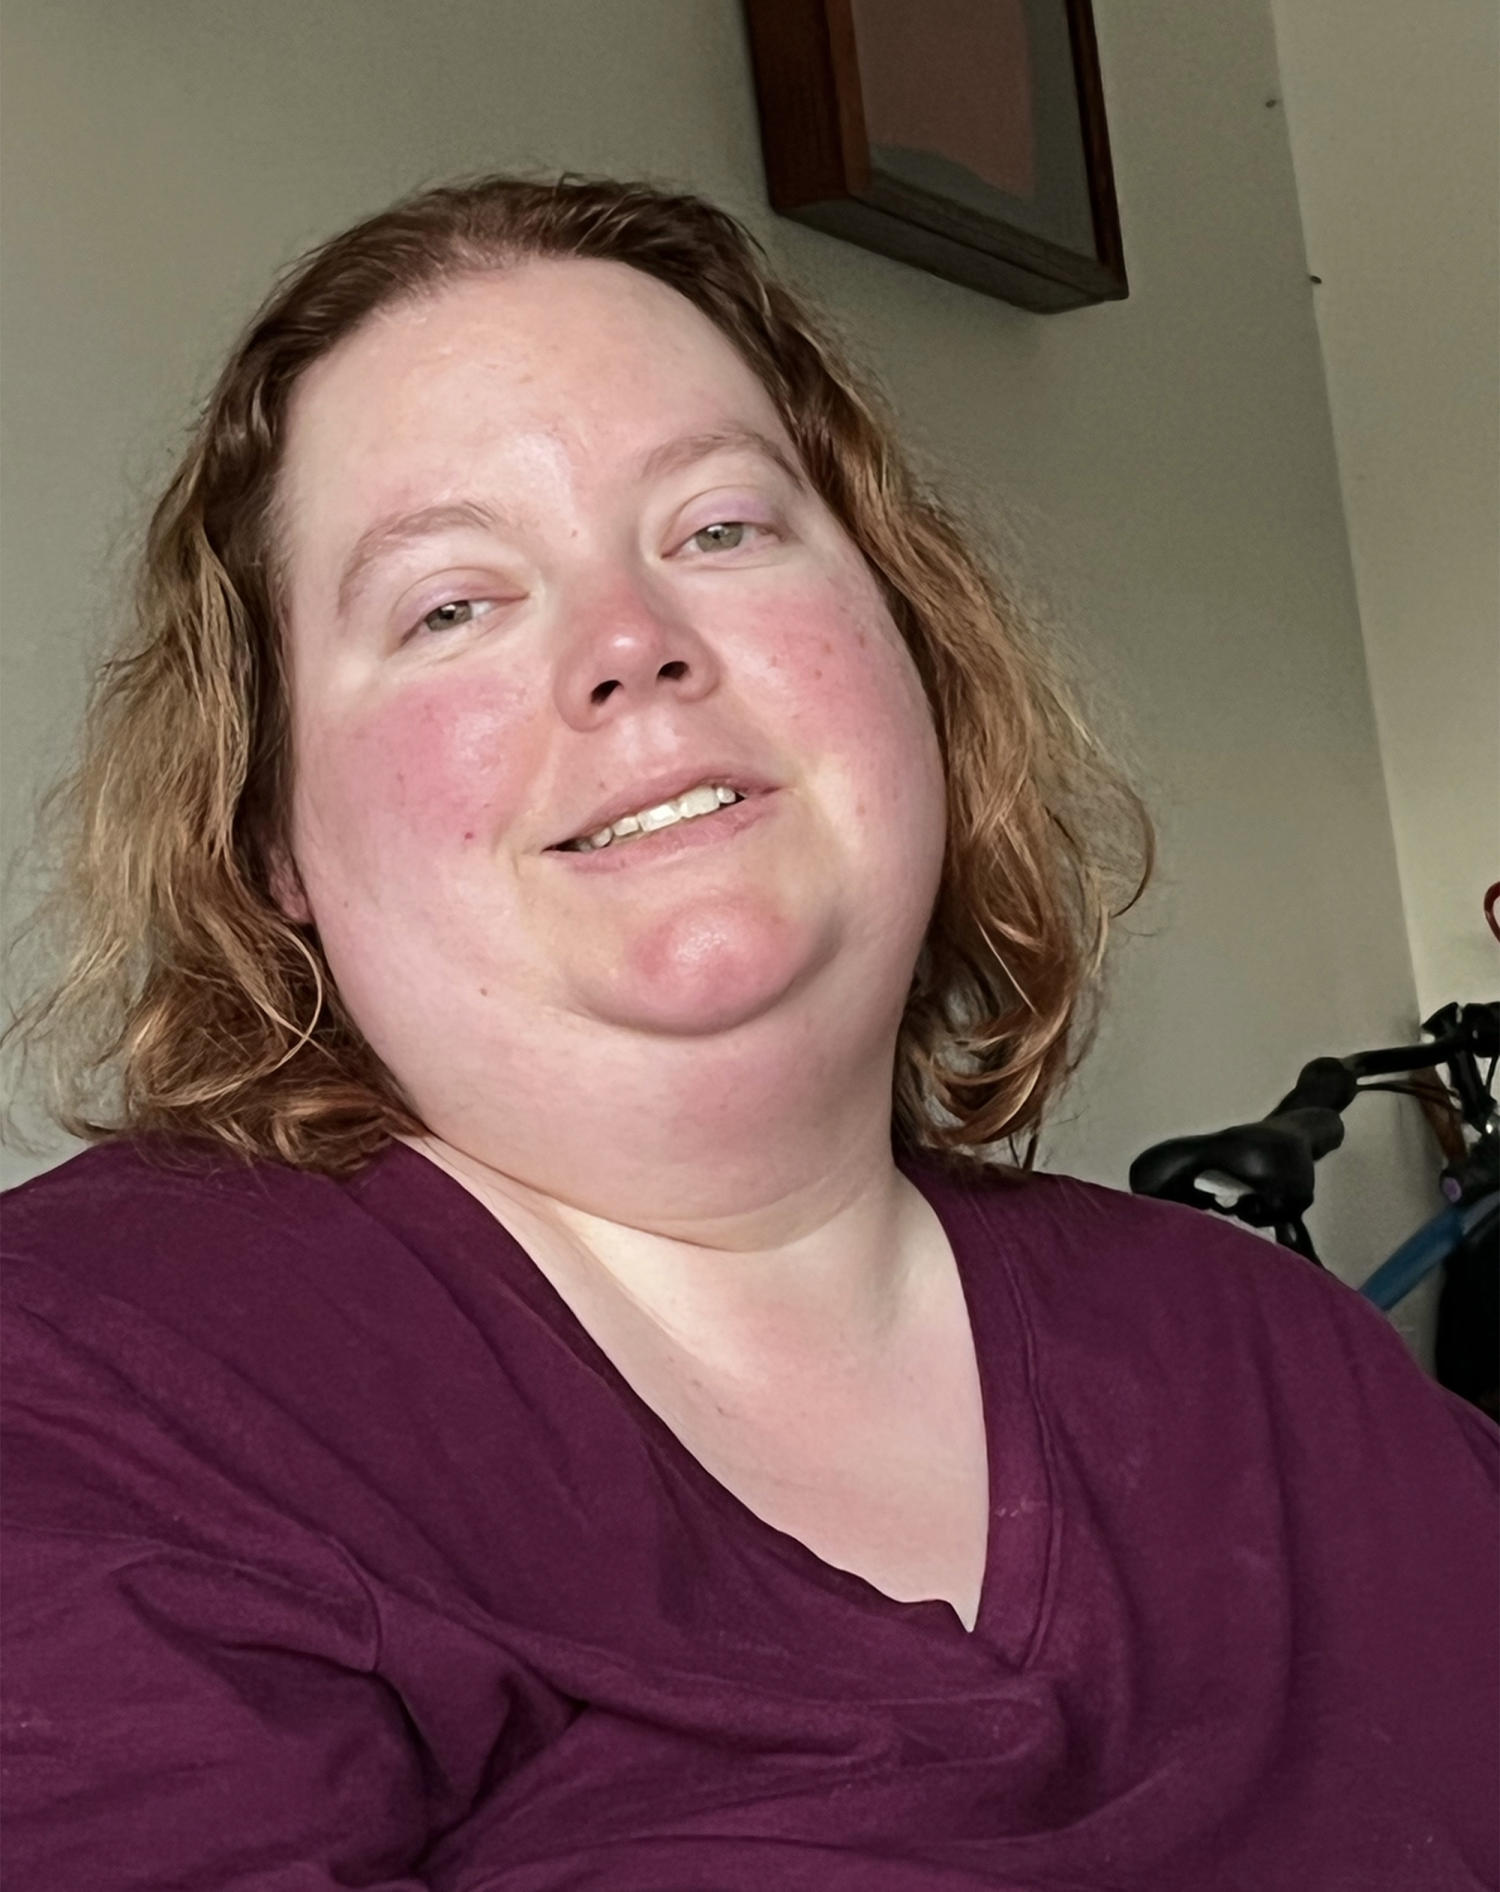 after losing 210 lbs with walking and a low-carb diet, 1 mom has 4 pounds of skin removed